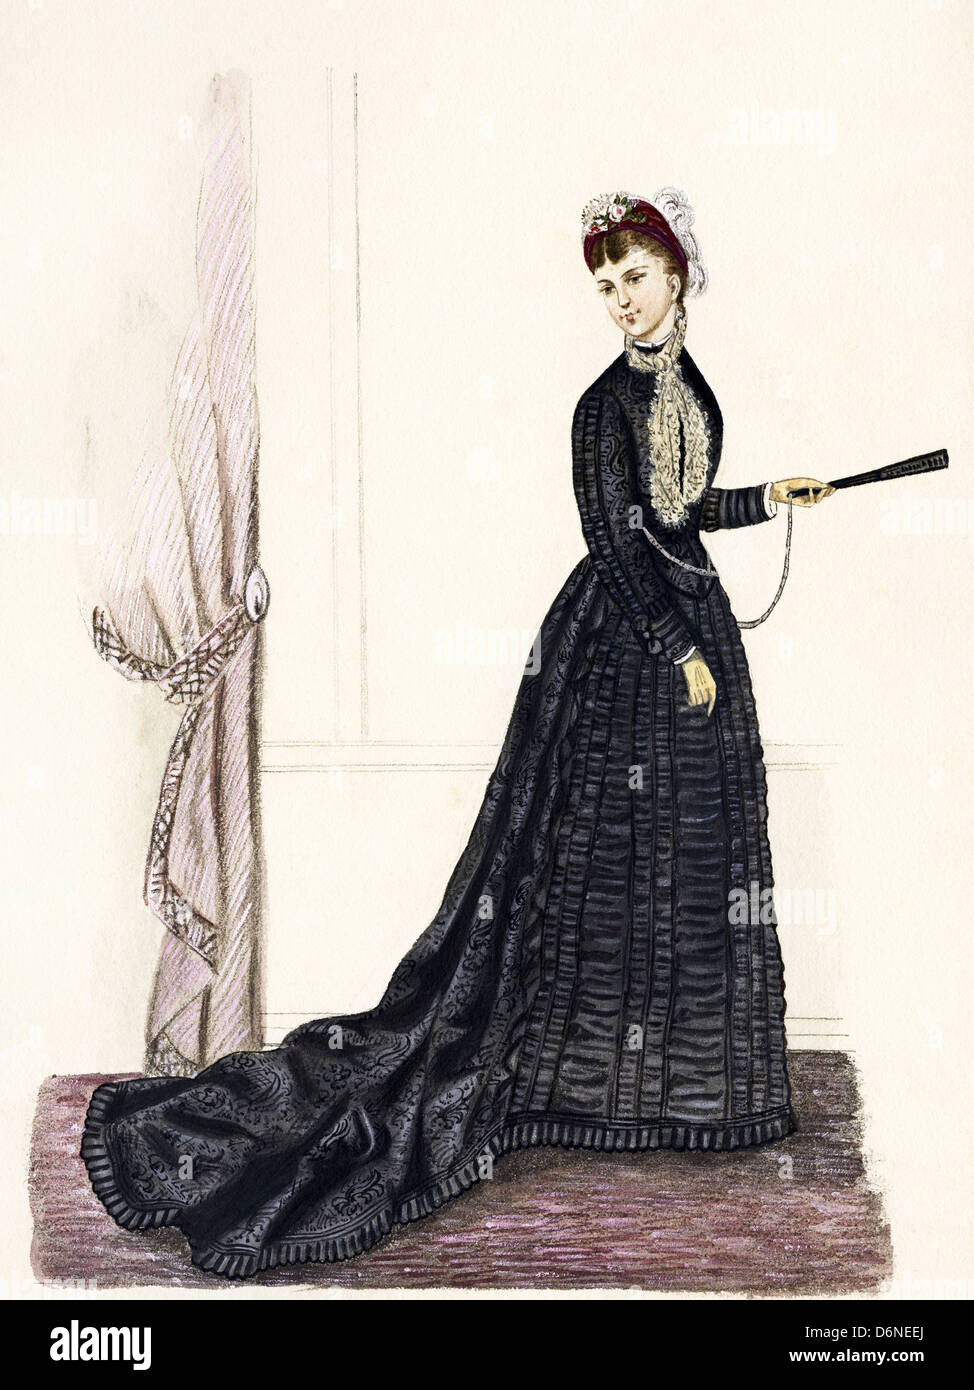 French fashion from the Victorian era circa 1870s. Original watercolour painting artist unknown Stock Photo